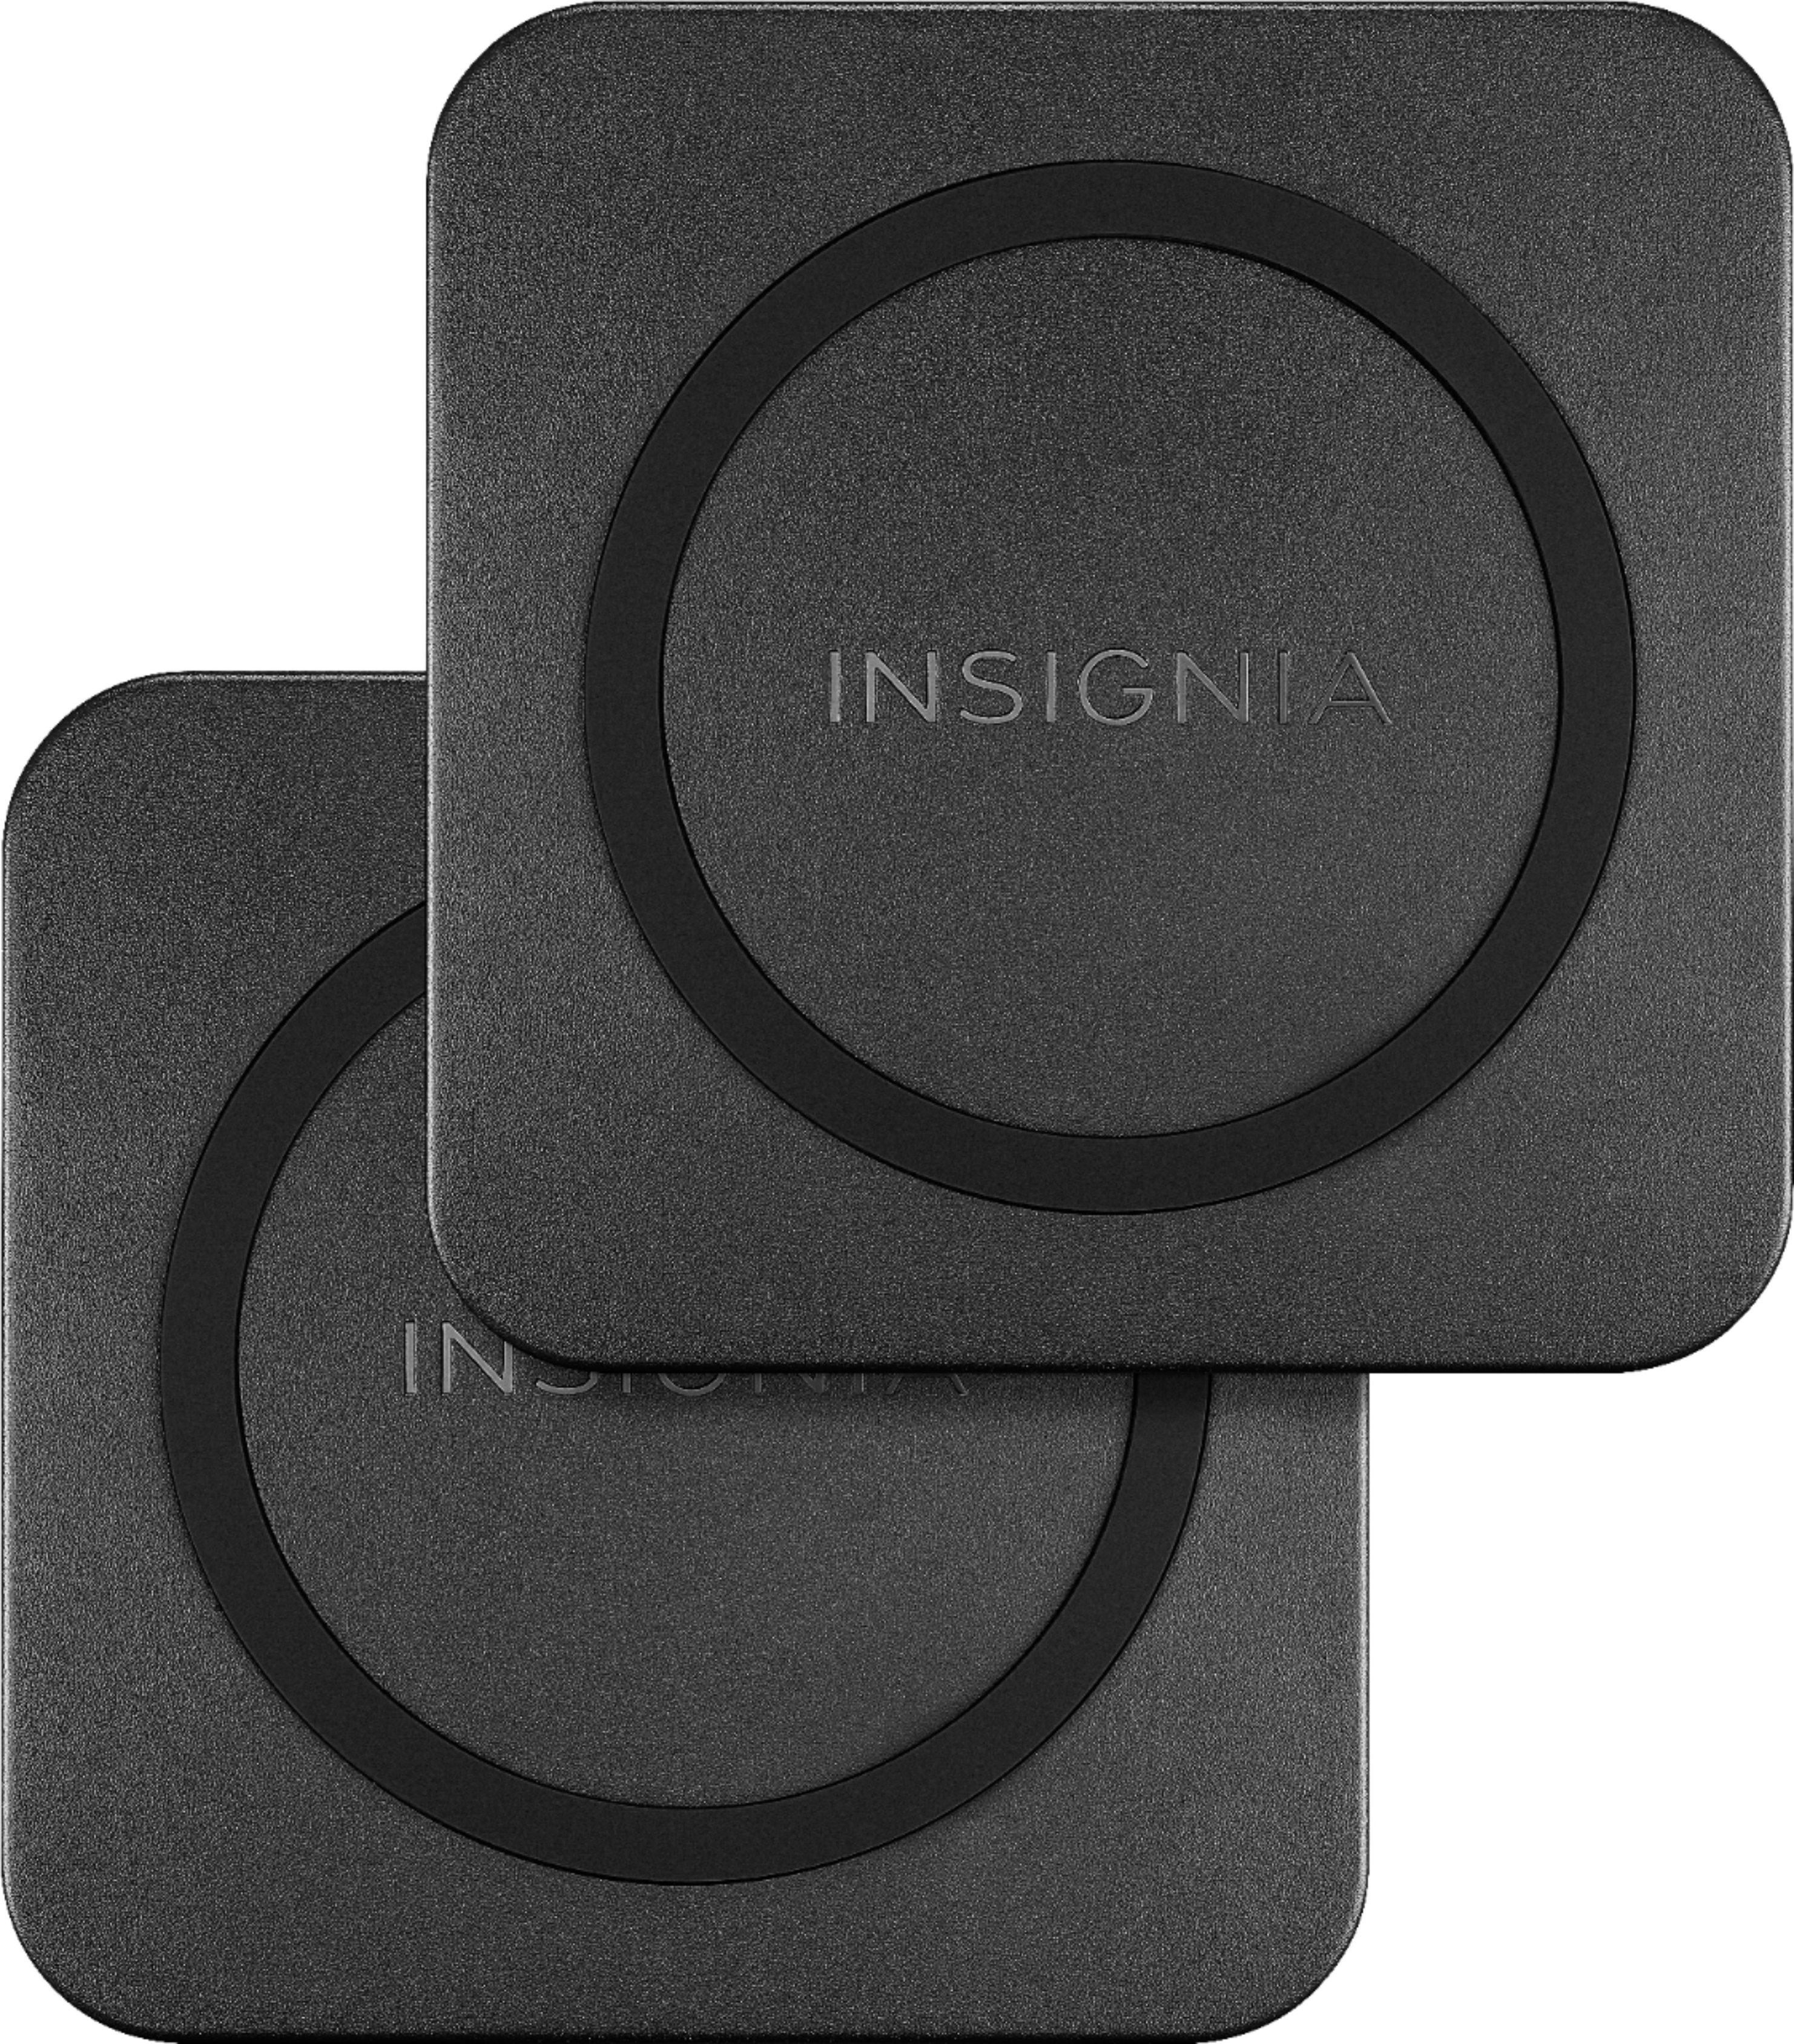 Insignia™ 10 Qi Certified Wireless Charging Pad for Android/iPhone (2 Pack) Black Best Buy